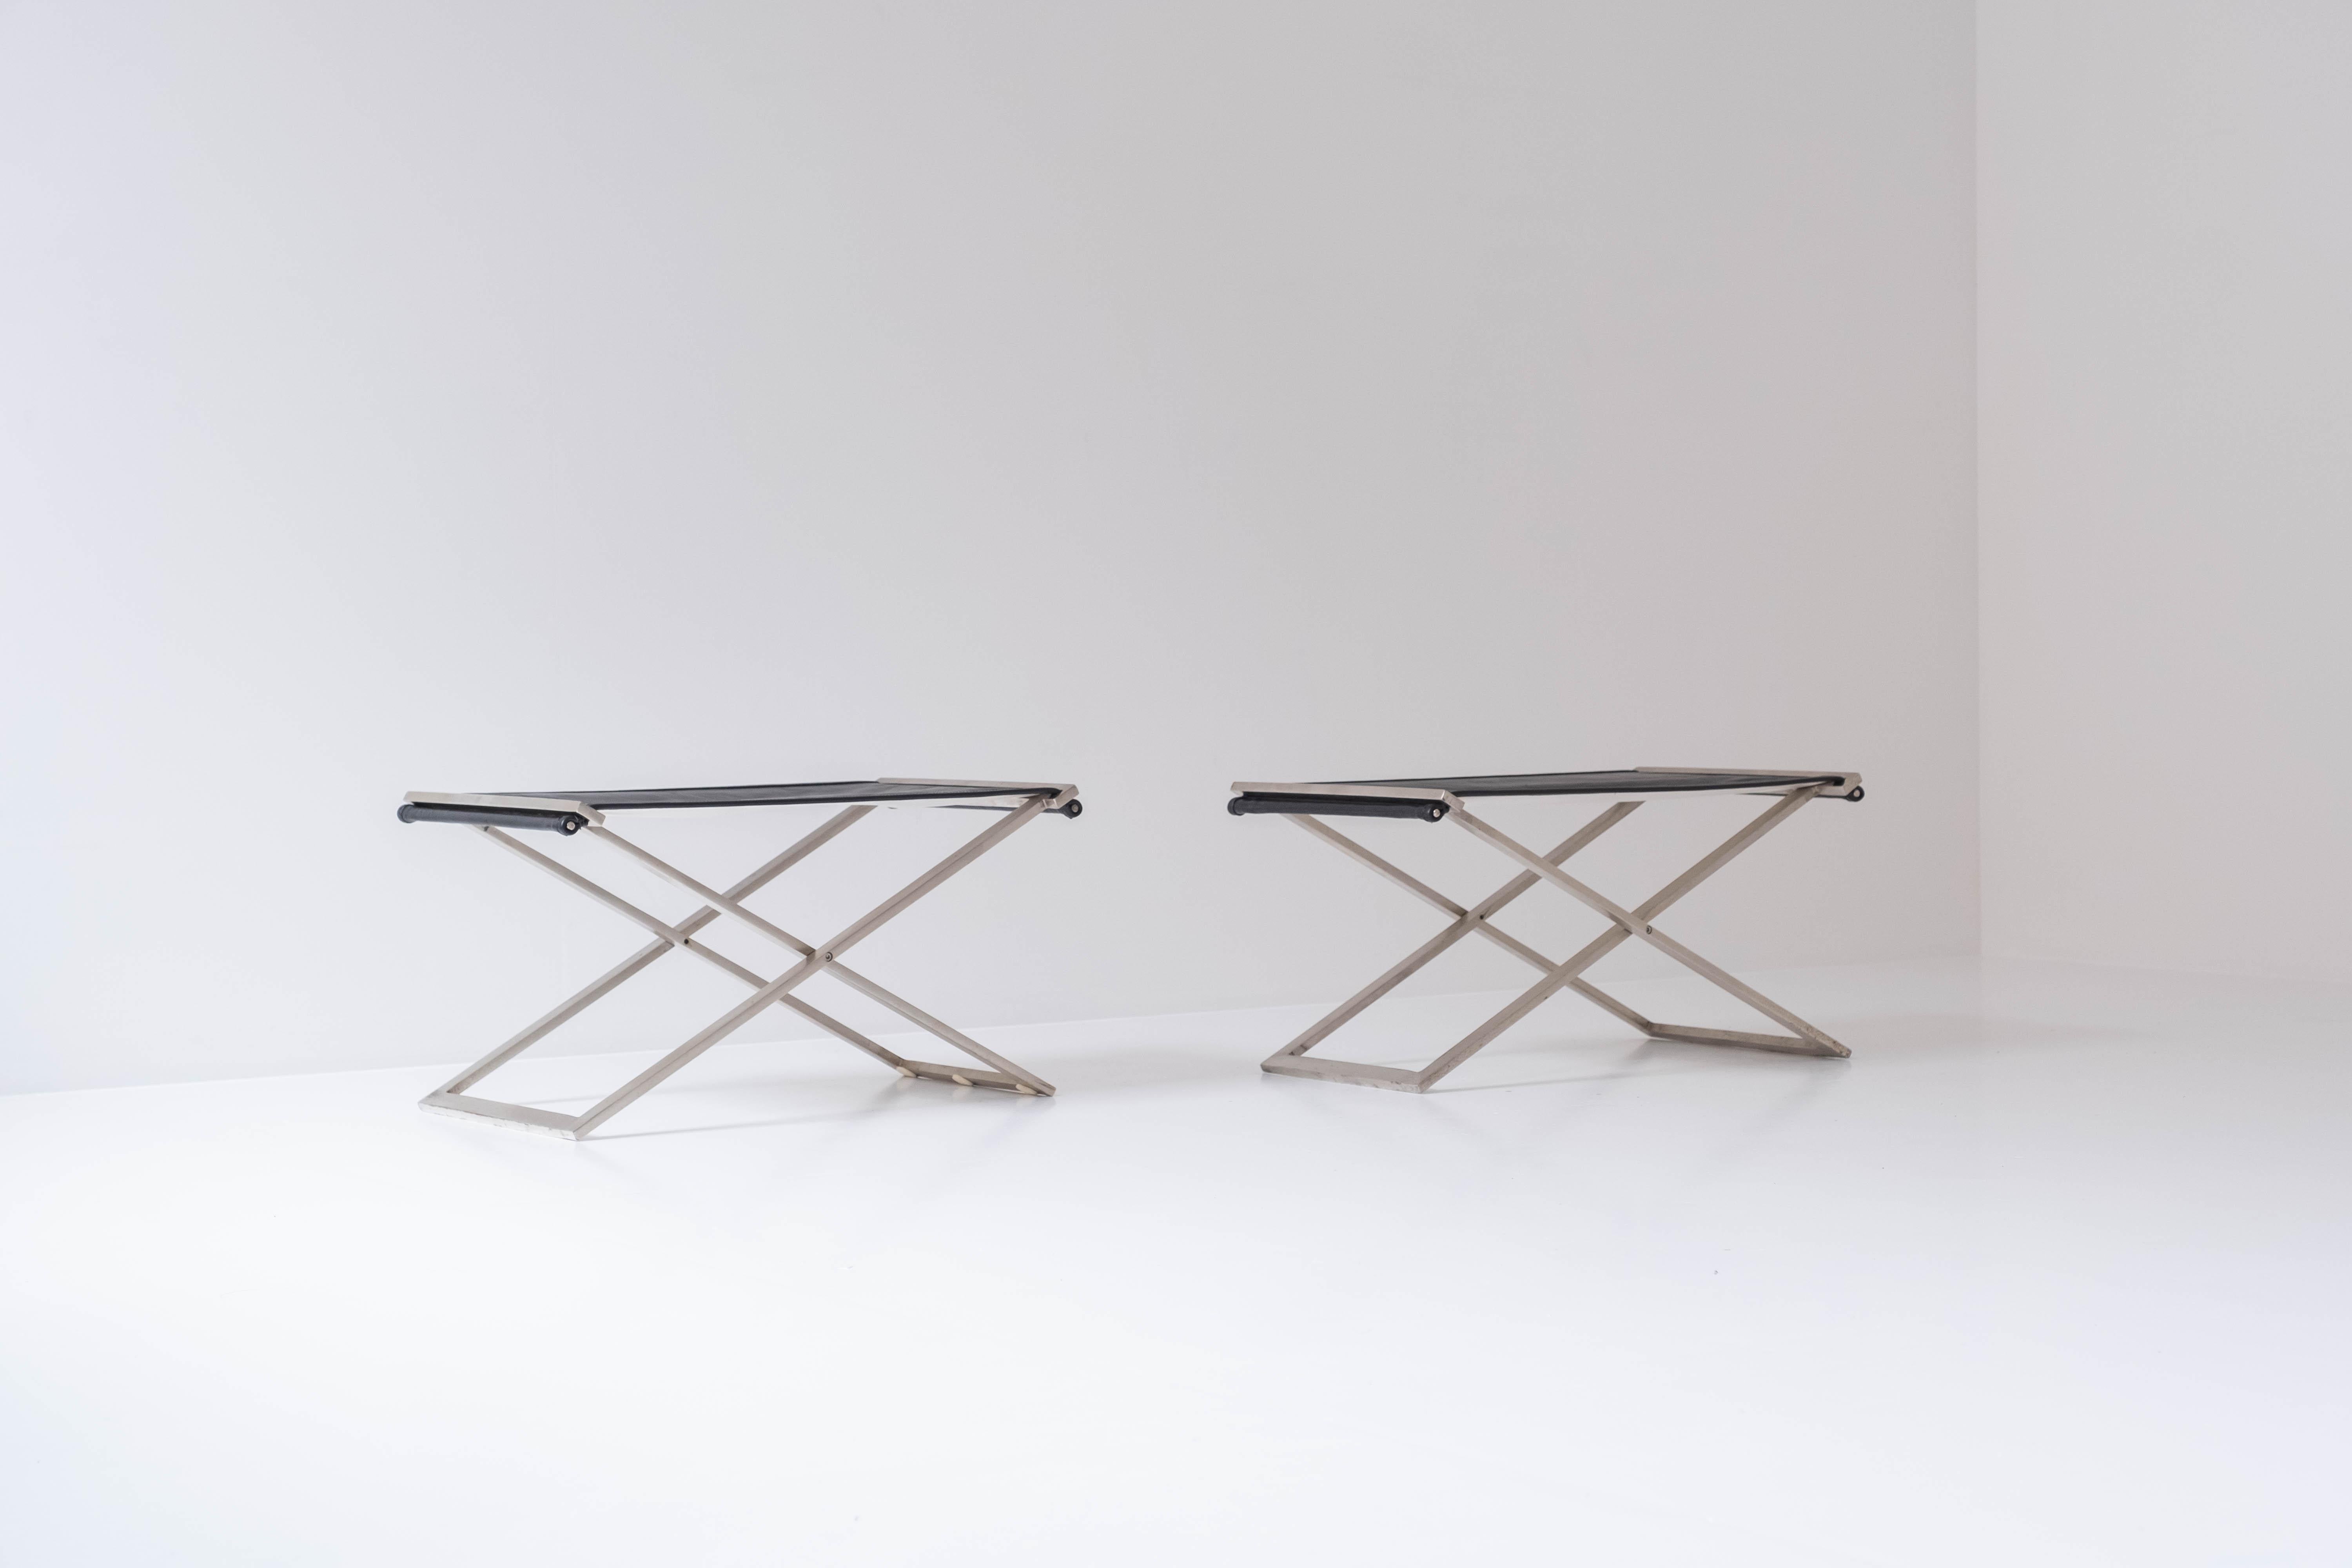 Set of two folding stools from Denmark, designed in the 1960s. These stools features steel frames and black leather seats. Professionally re-upholsterd in a high quality leather. Clearly inspired by the PK91 by Poul Kjaerholm.